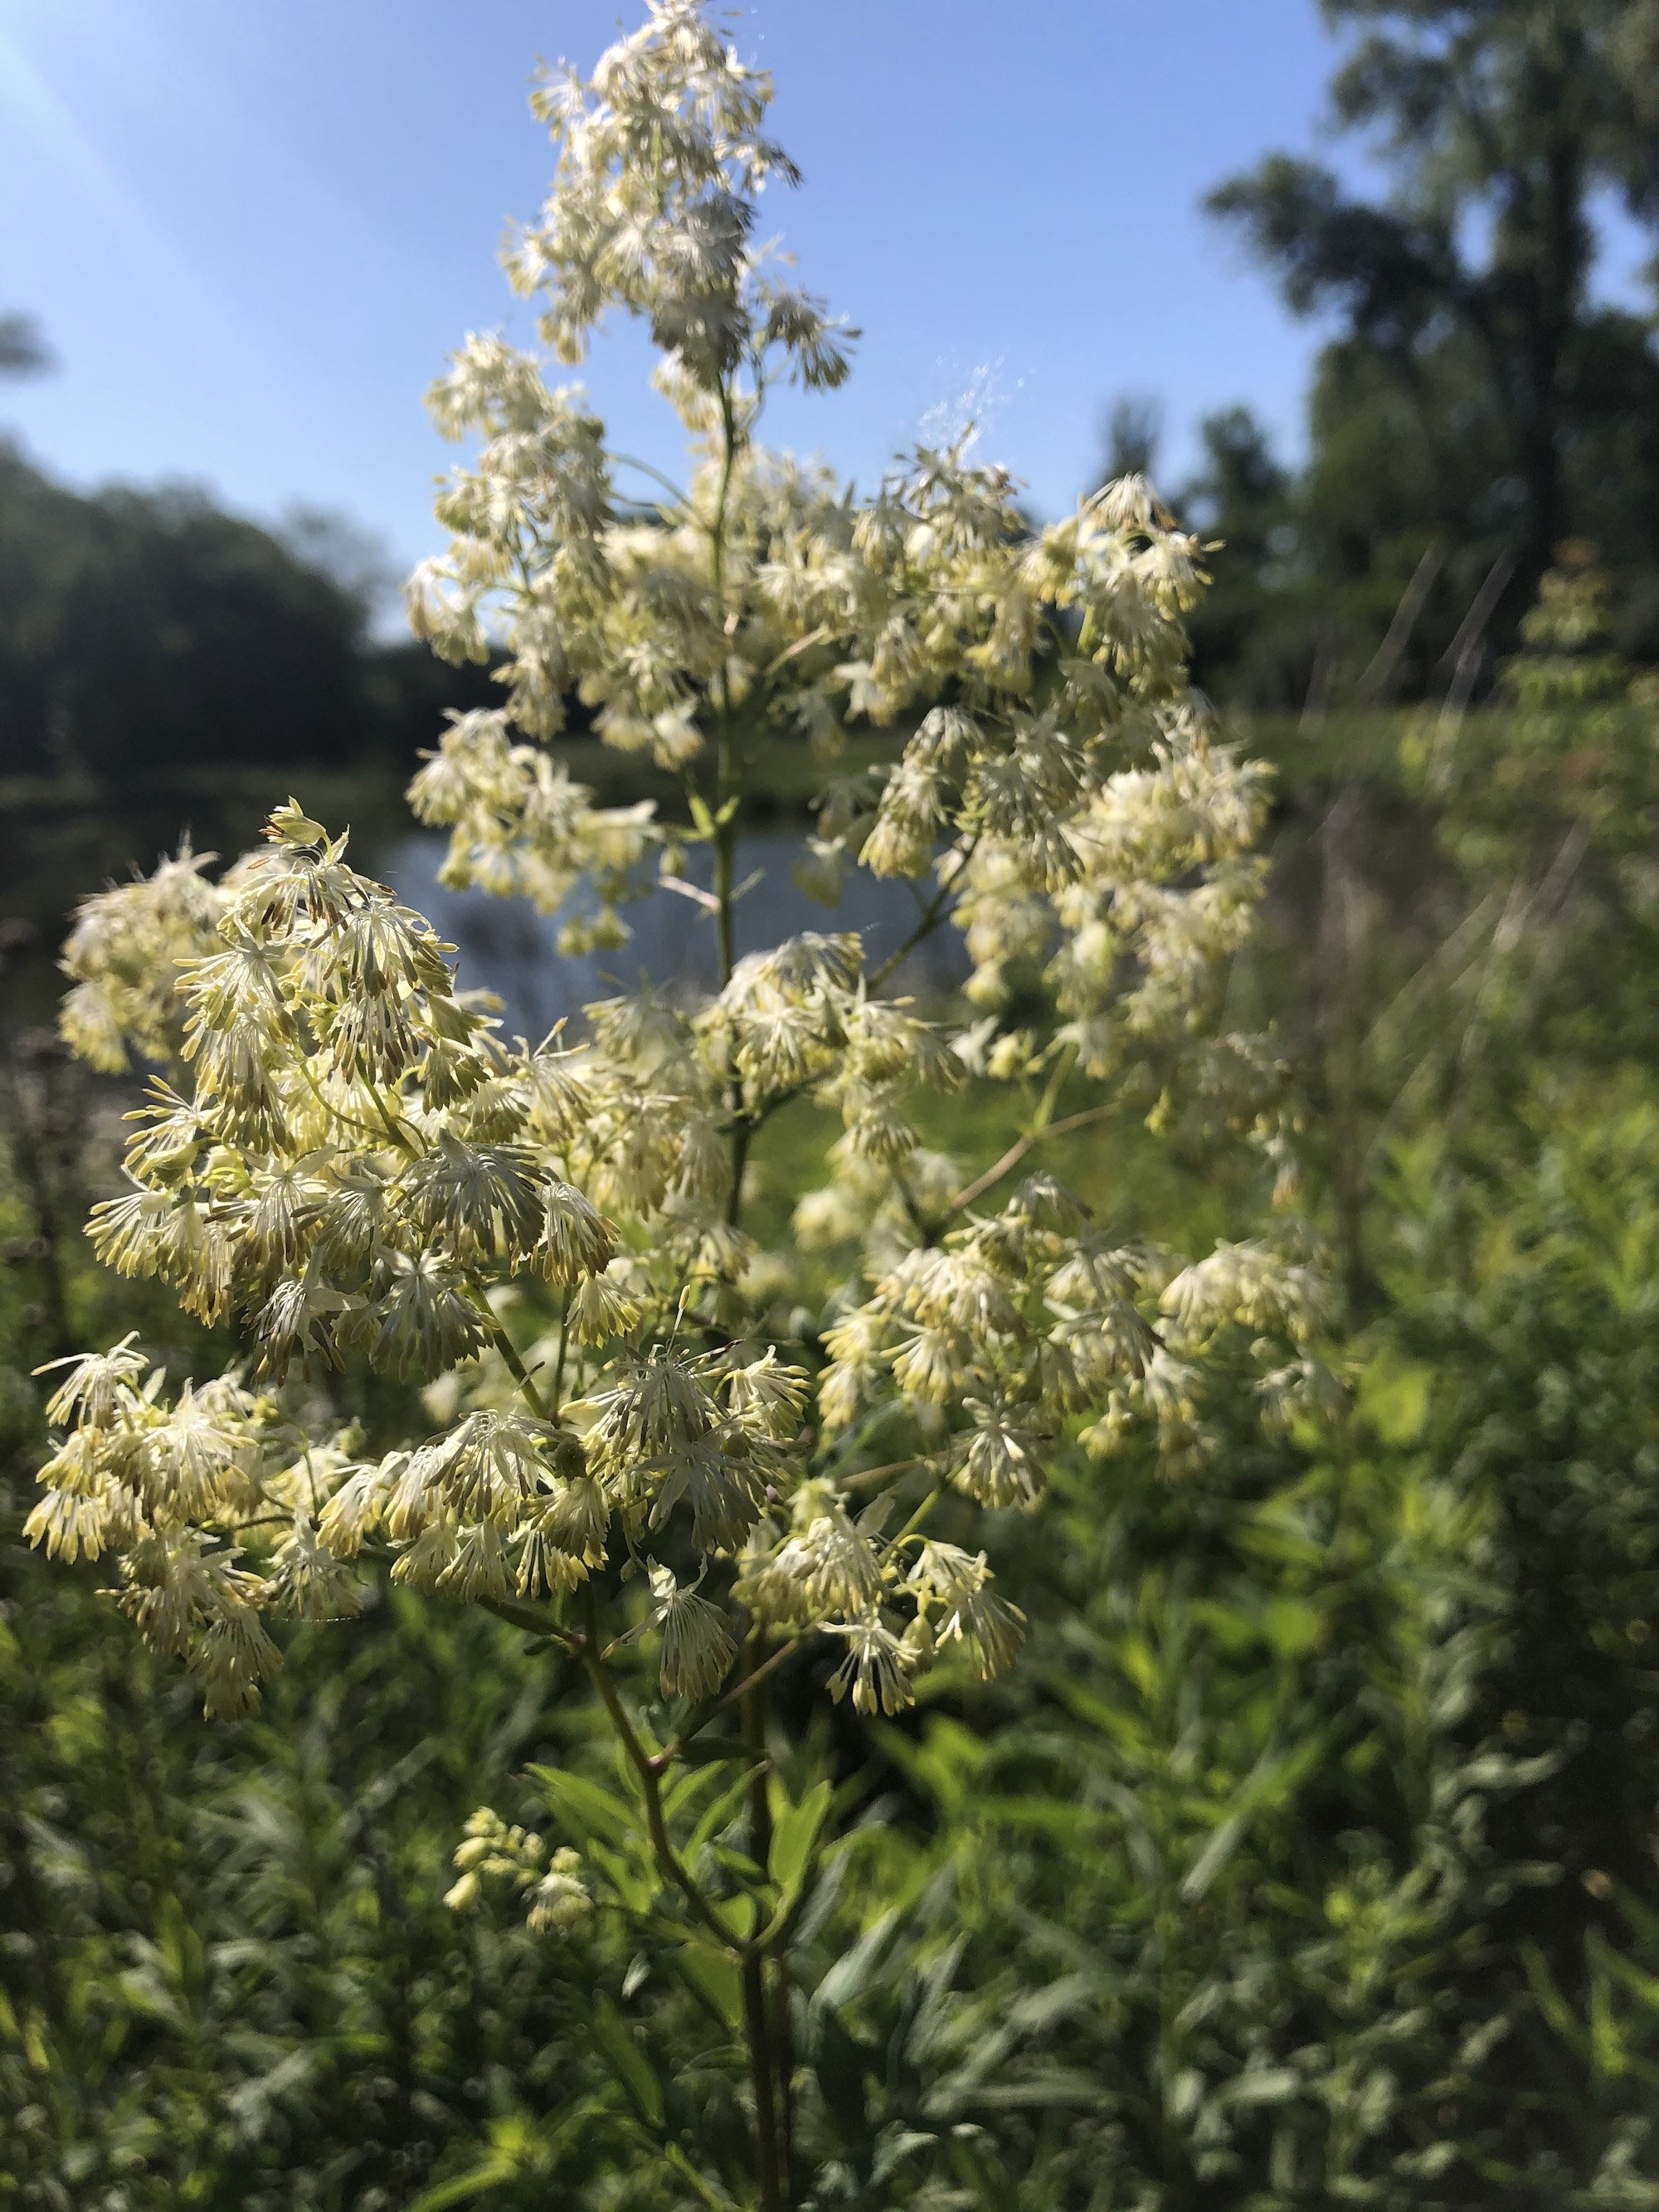 Tall Meadow-rue on shore of Retaining Pond on June 14, 2020.